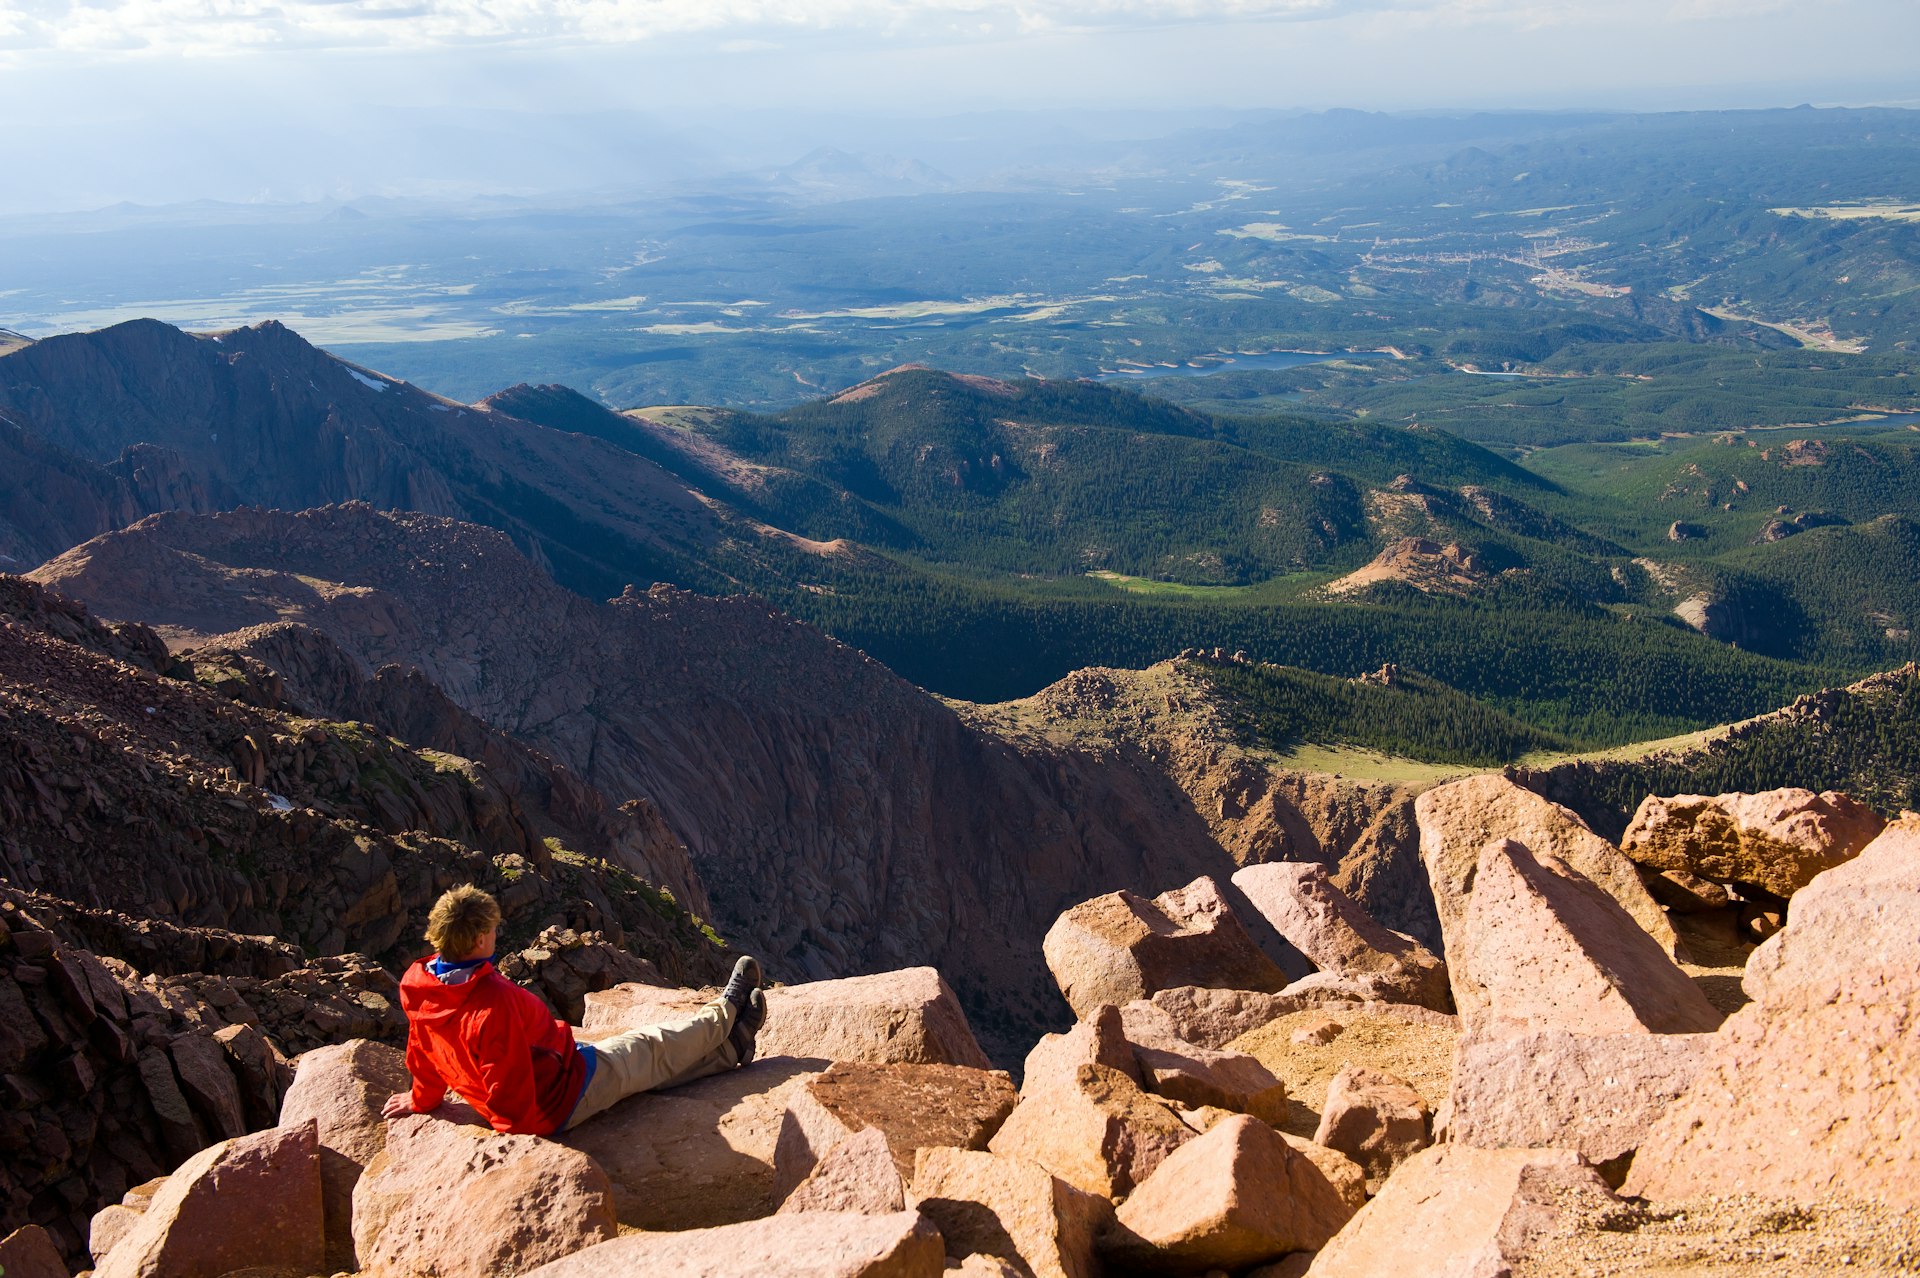 A young male hiker enjoying the scenic view from Pikes Peak on beautiful, sunny day, kicking back on warm sunny rocks with his legs outstretched in front.